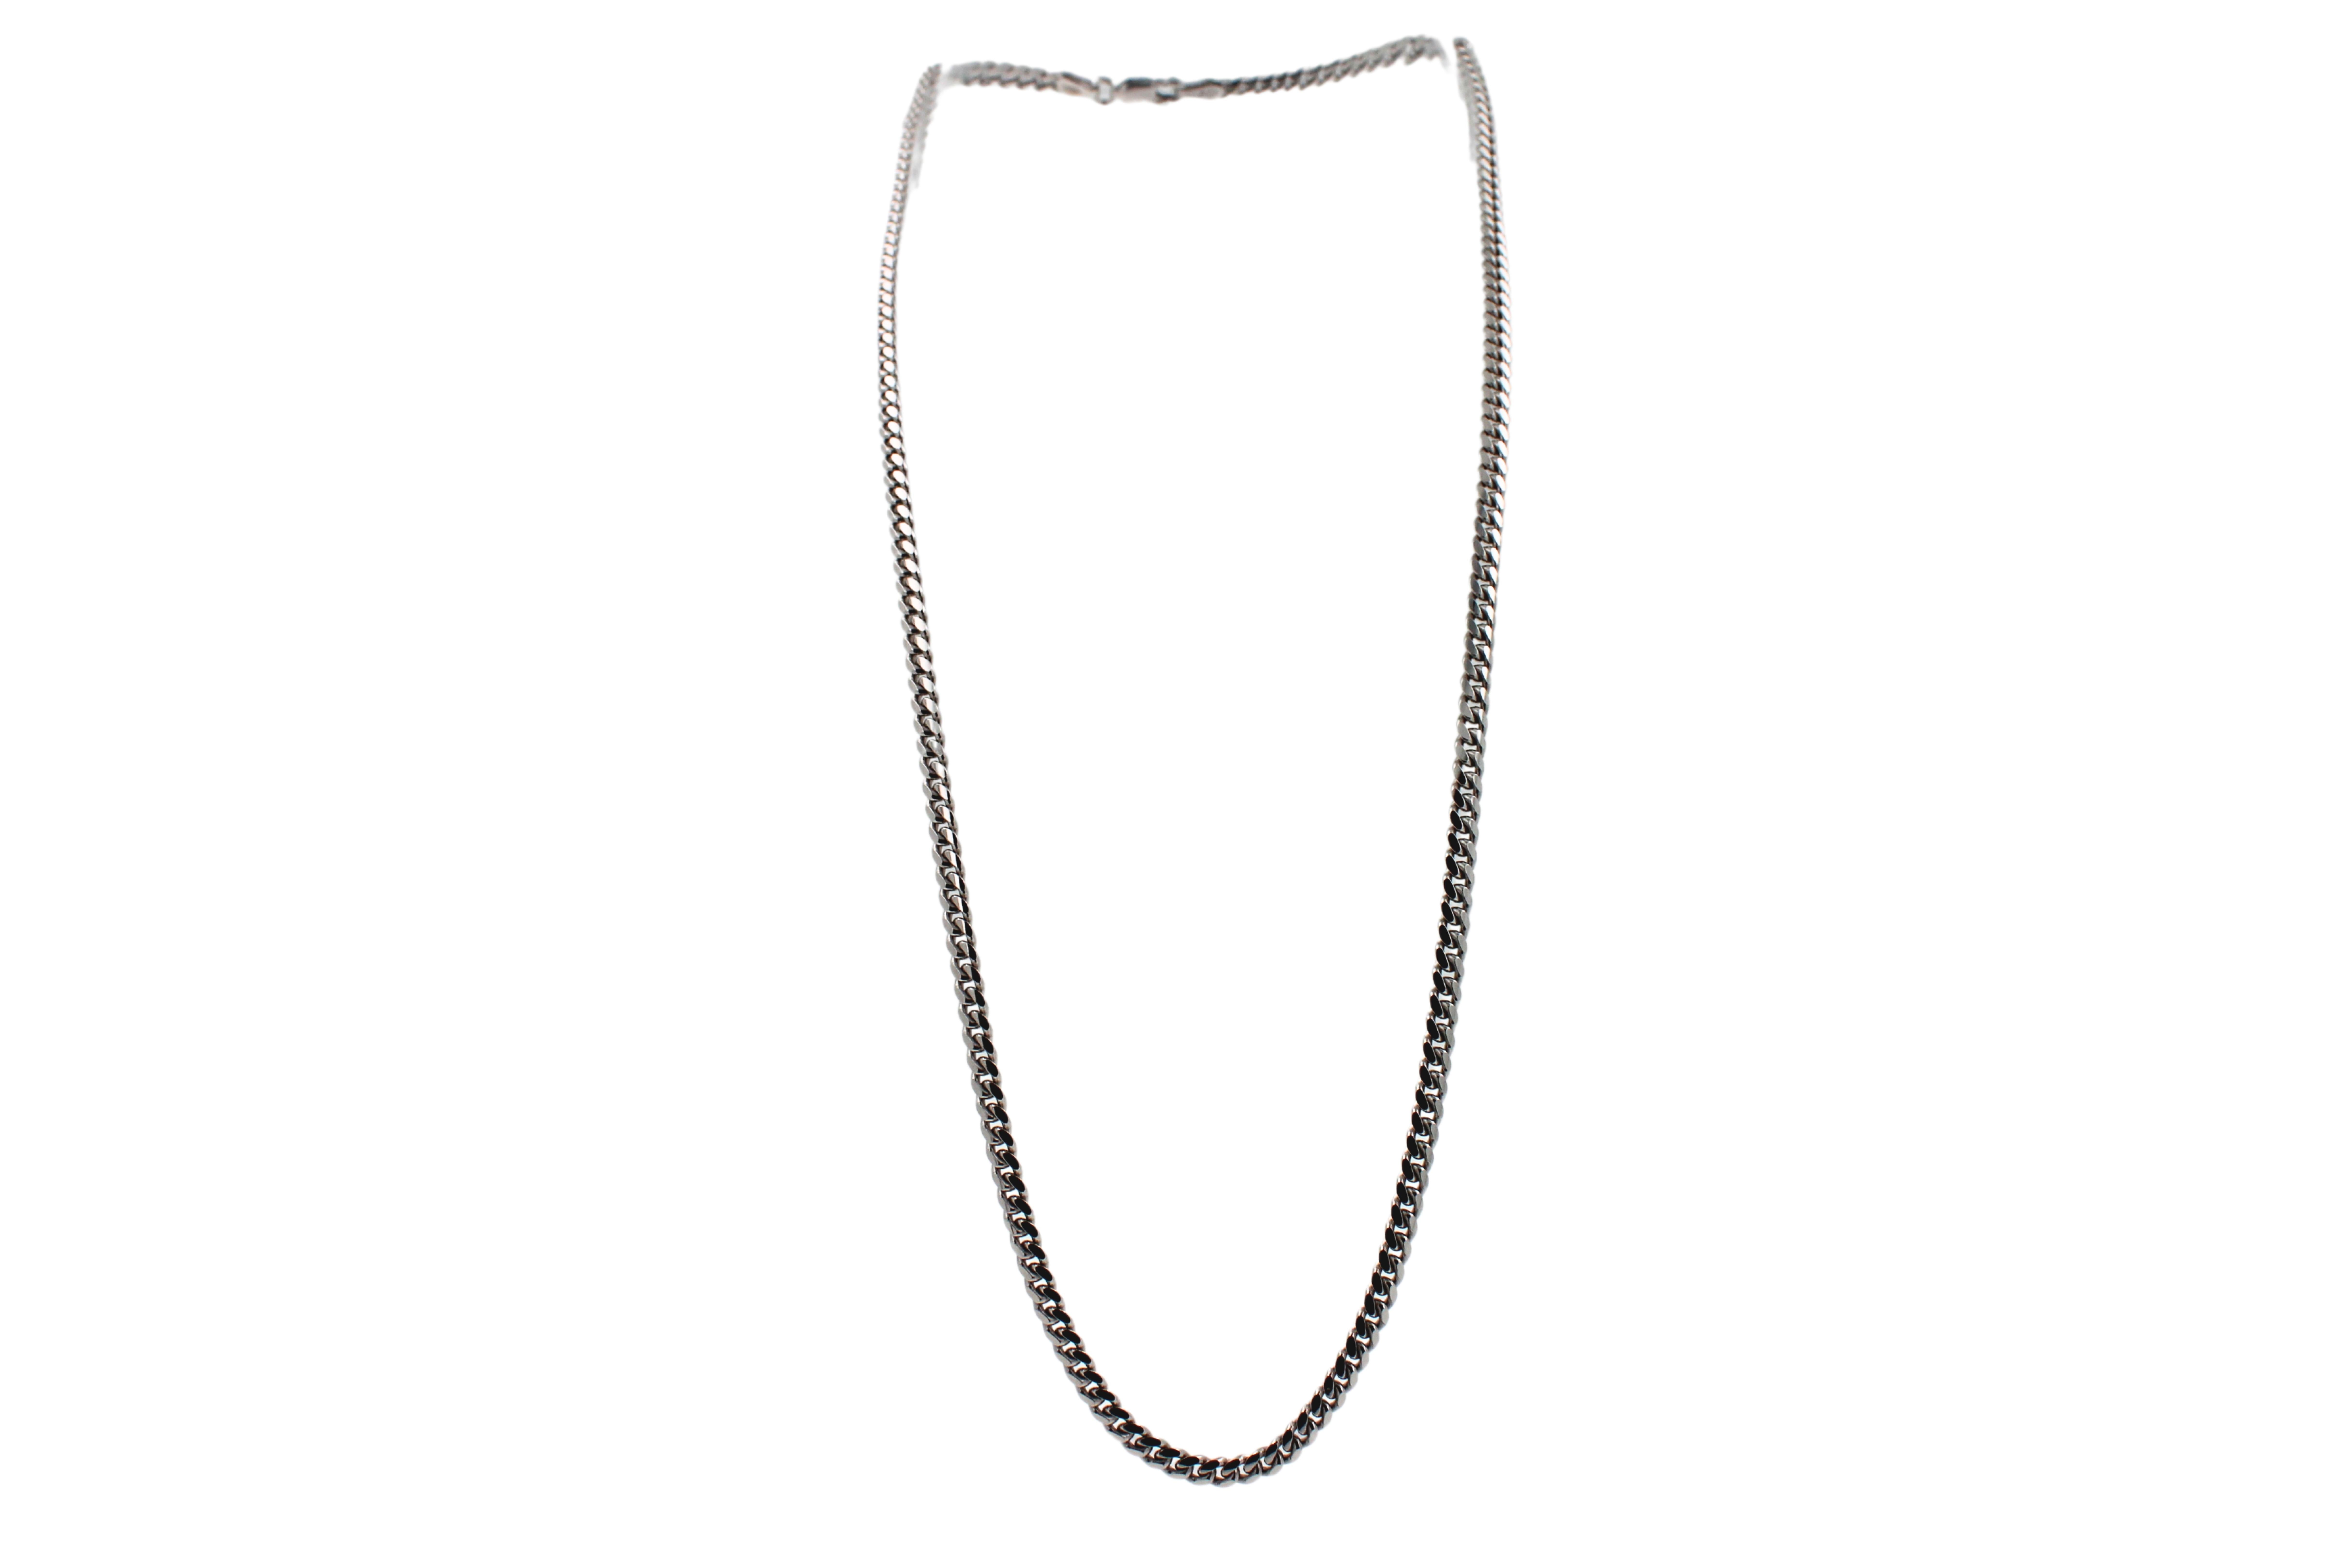 Curb Cuban Link Fancy Link 925 Sterling Silver Chain Necklace
•	18 inches
•	12 grams
•	3mm width
•       Solid Sterling Silver 925


